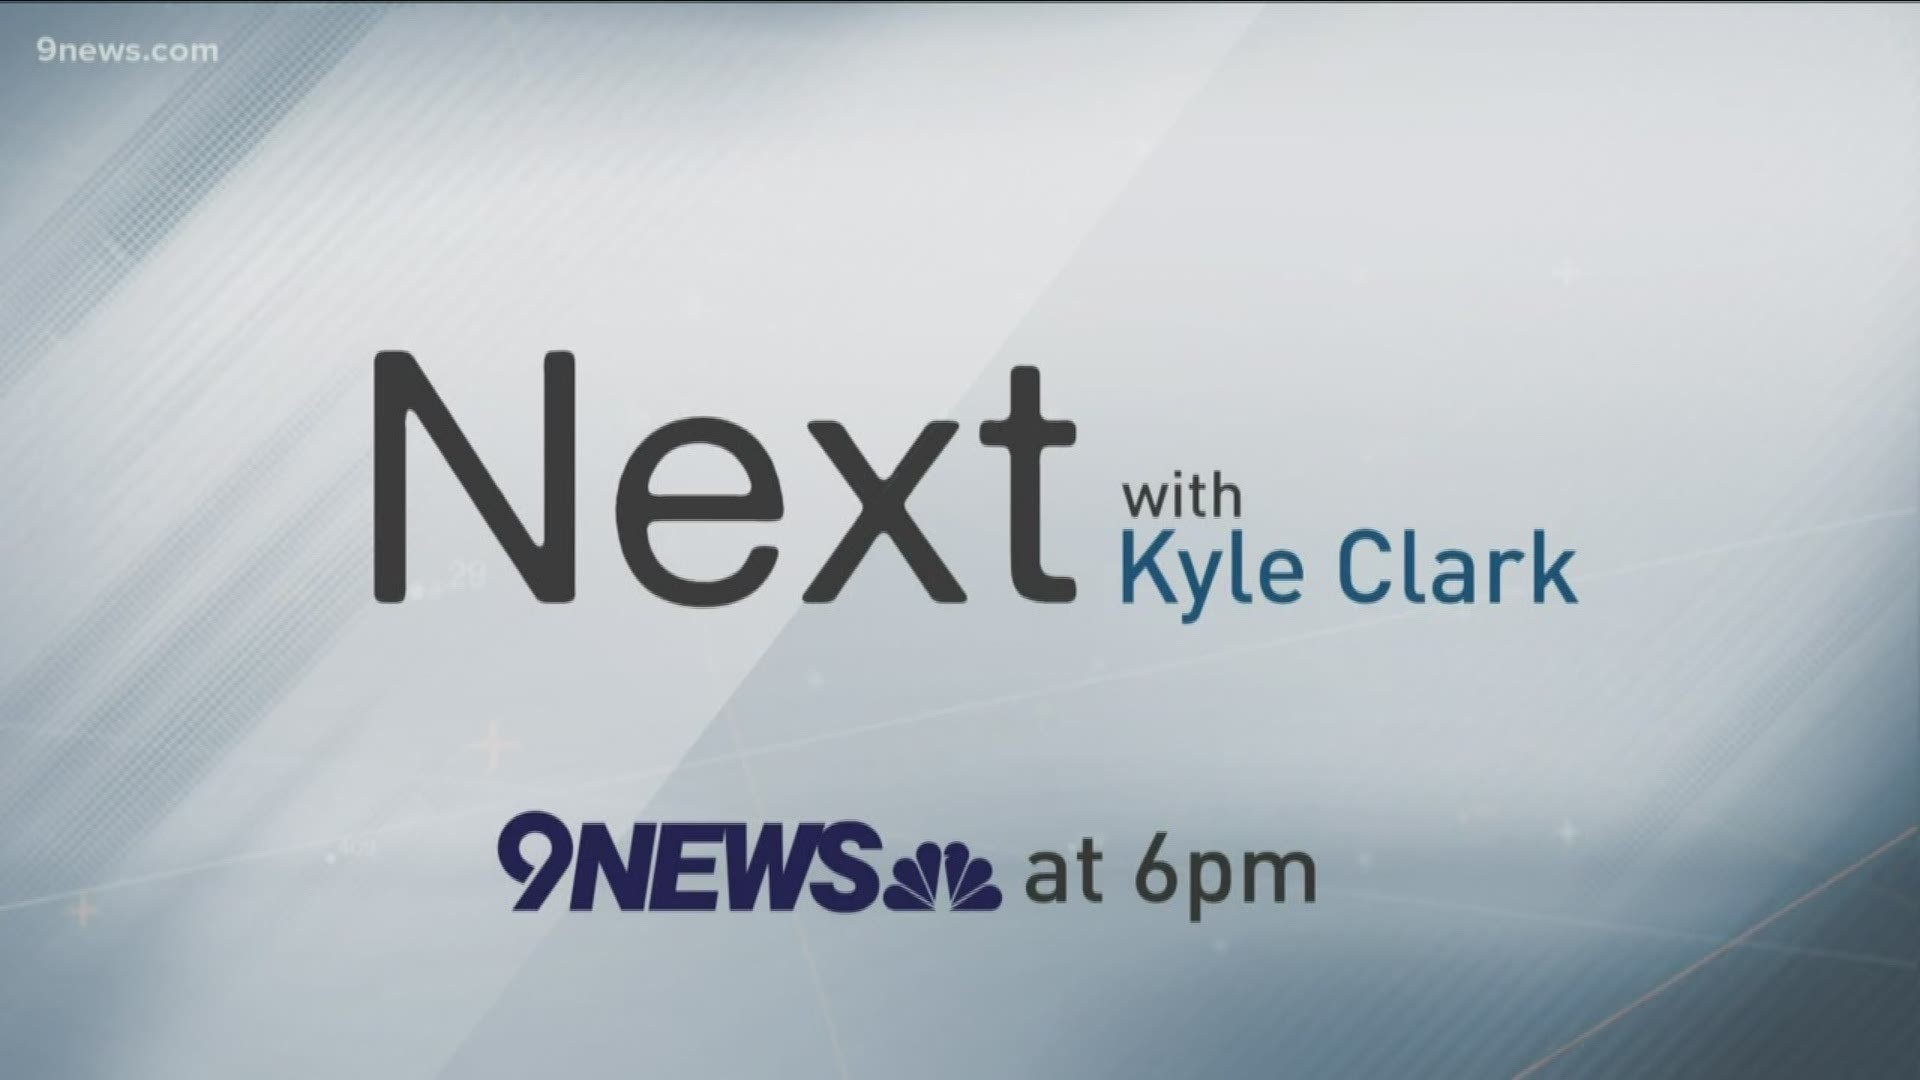 Watch this full episode of Next with Kyle Clark. 9NEWS at 6 p.m. 11/13/19.